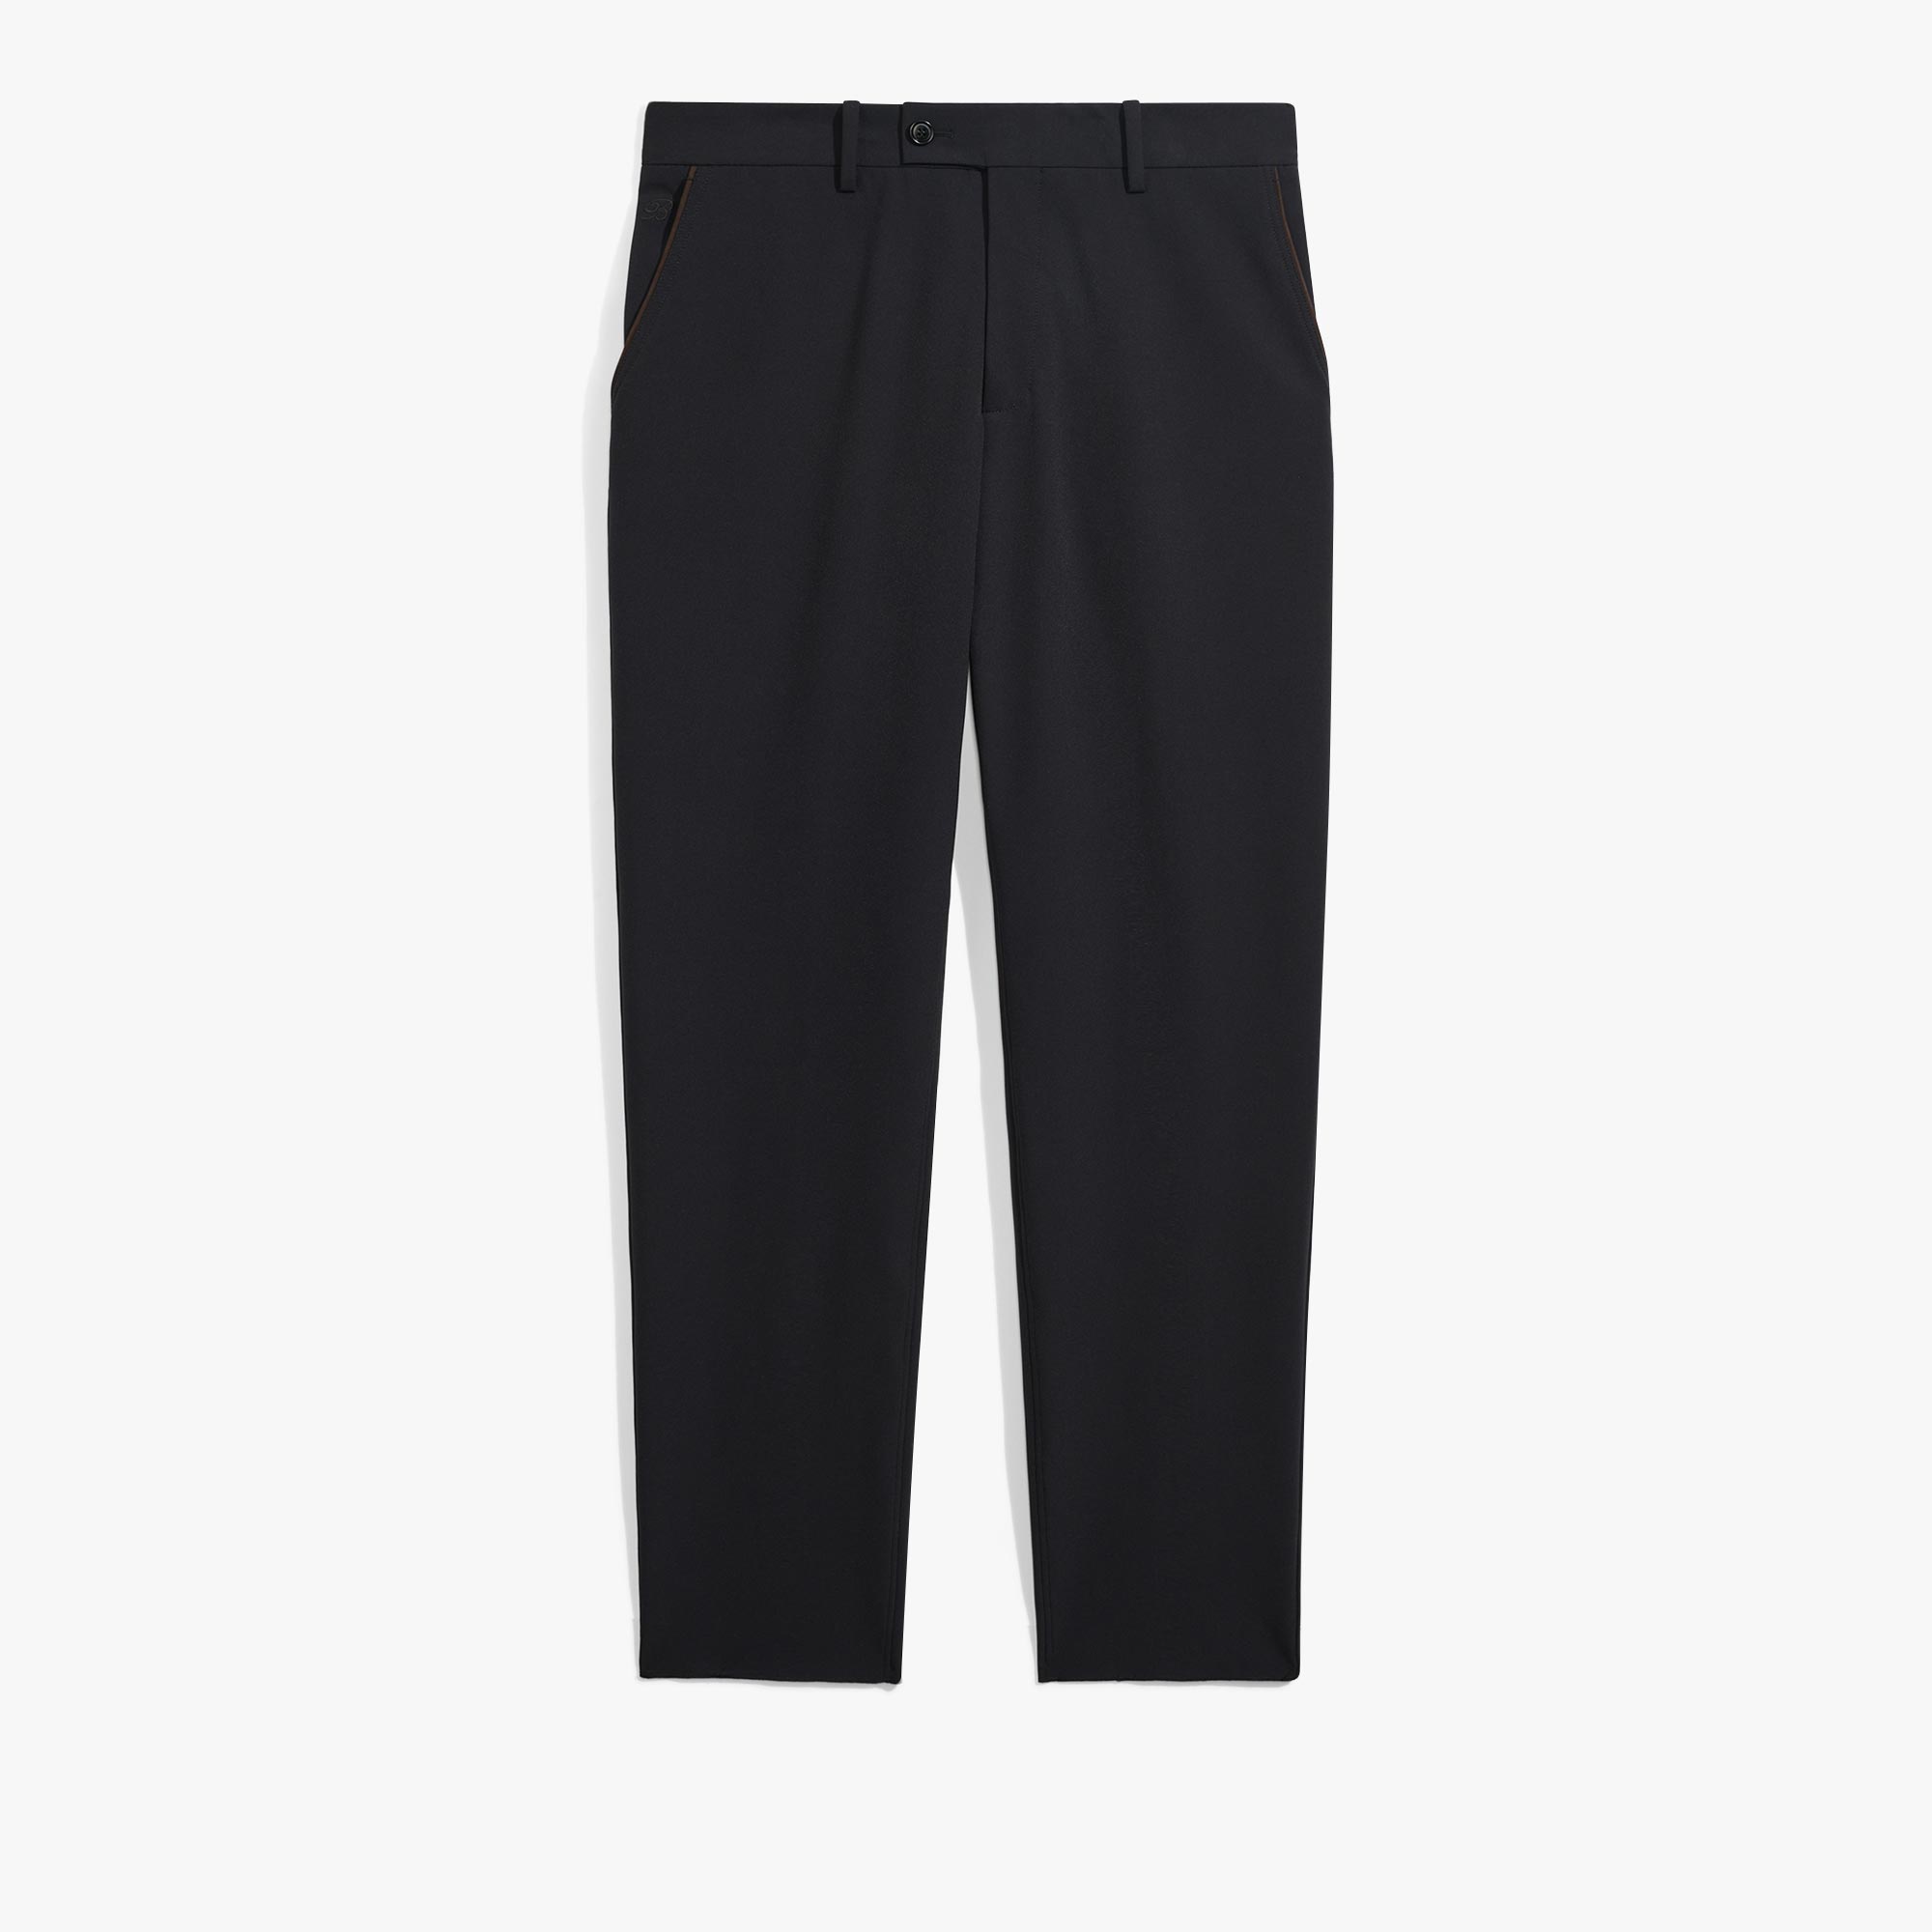 Golf Technical Trousers, COLD NIGHT BLUE, hi-res